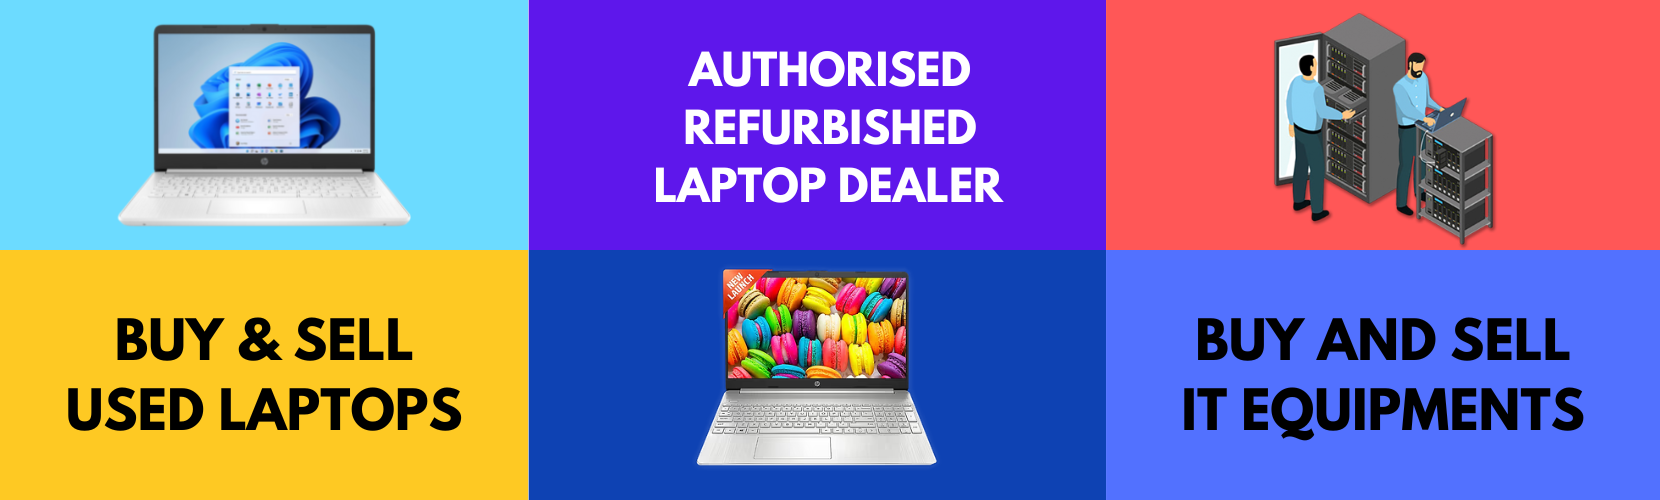 BUY & SELL OLD LAPTOPS (1)